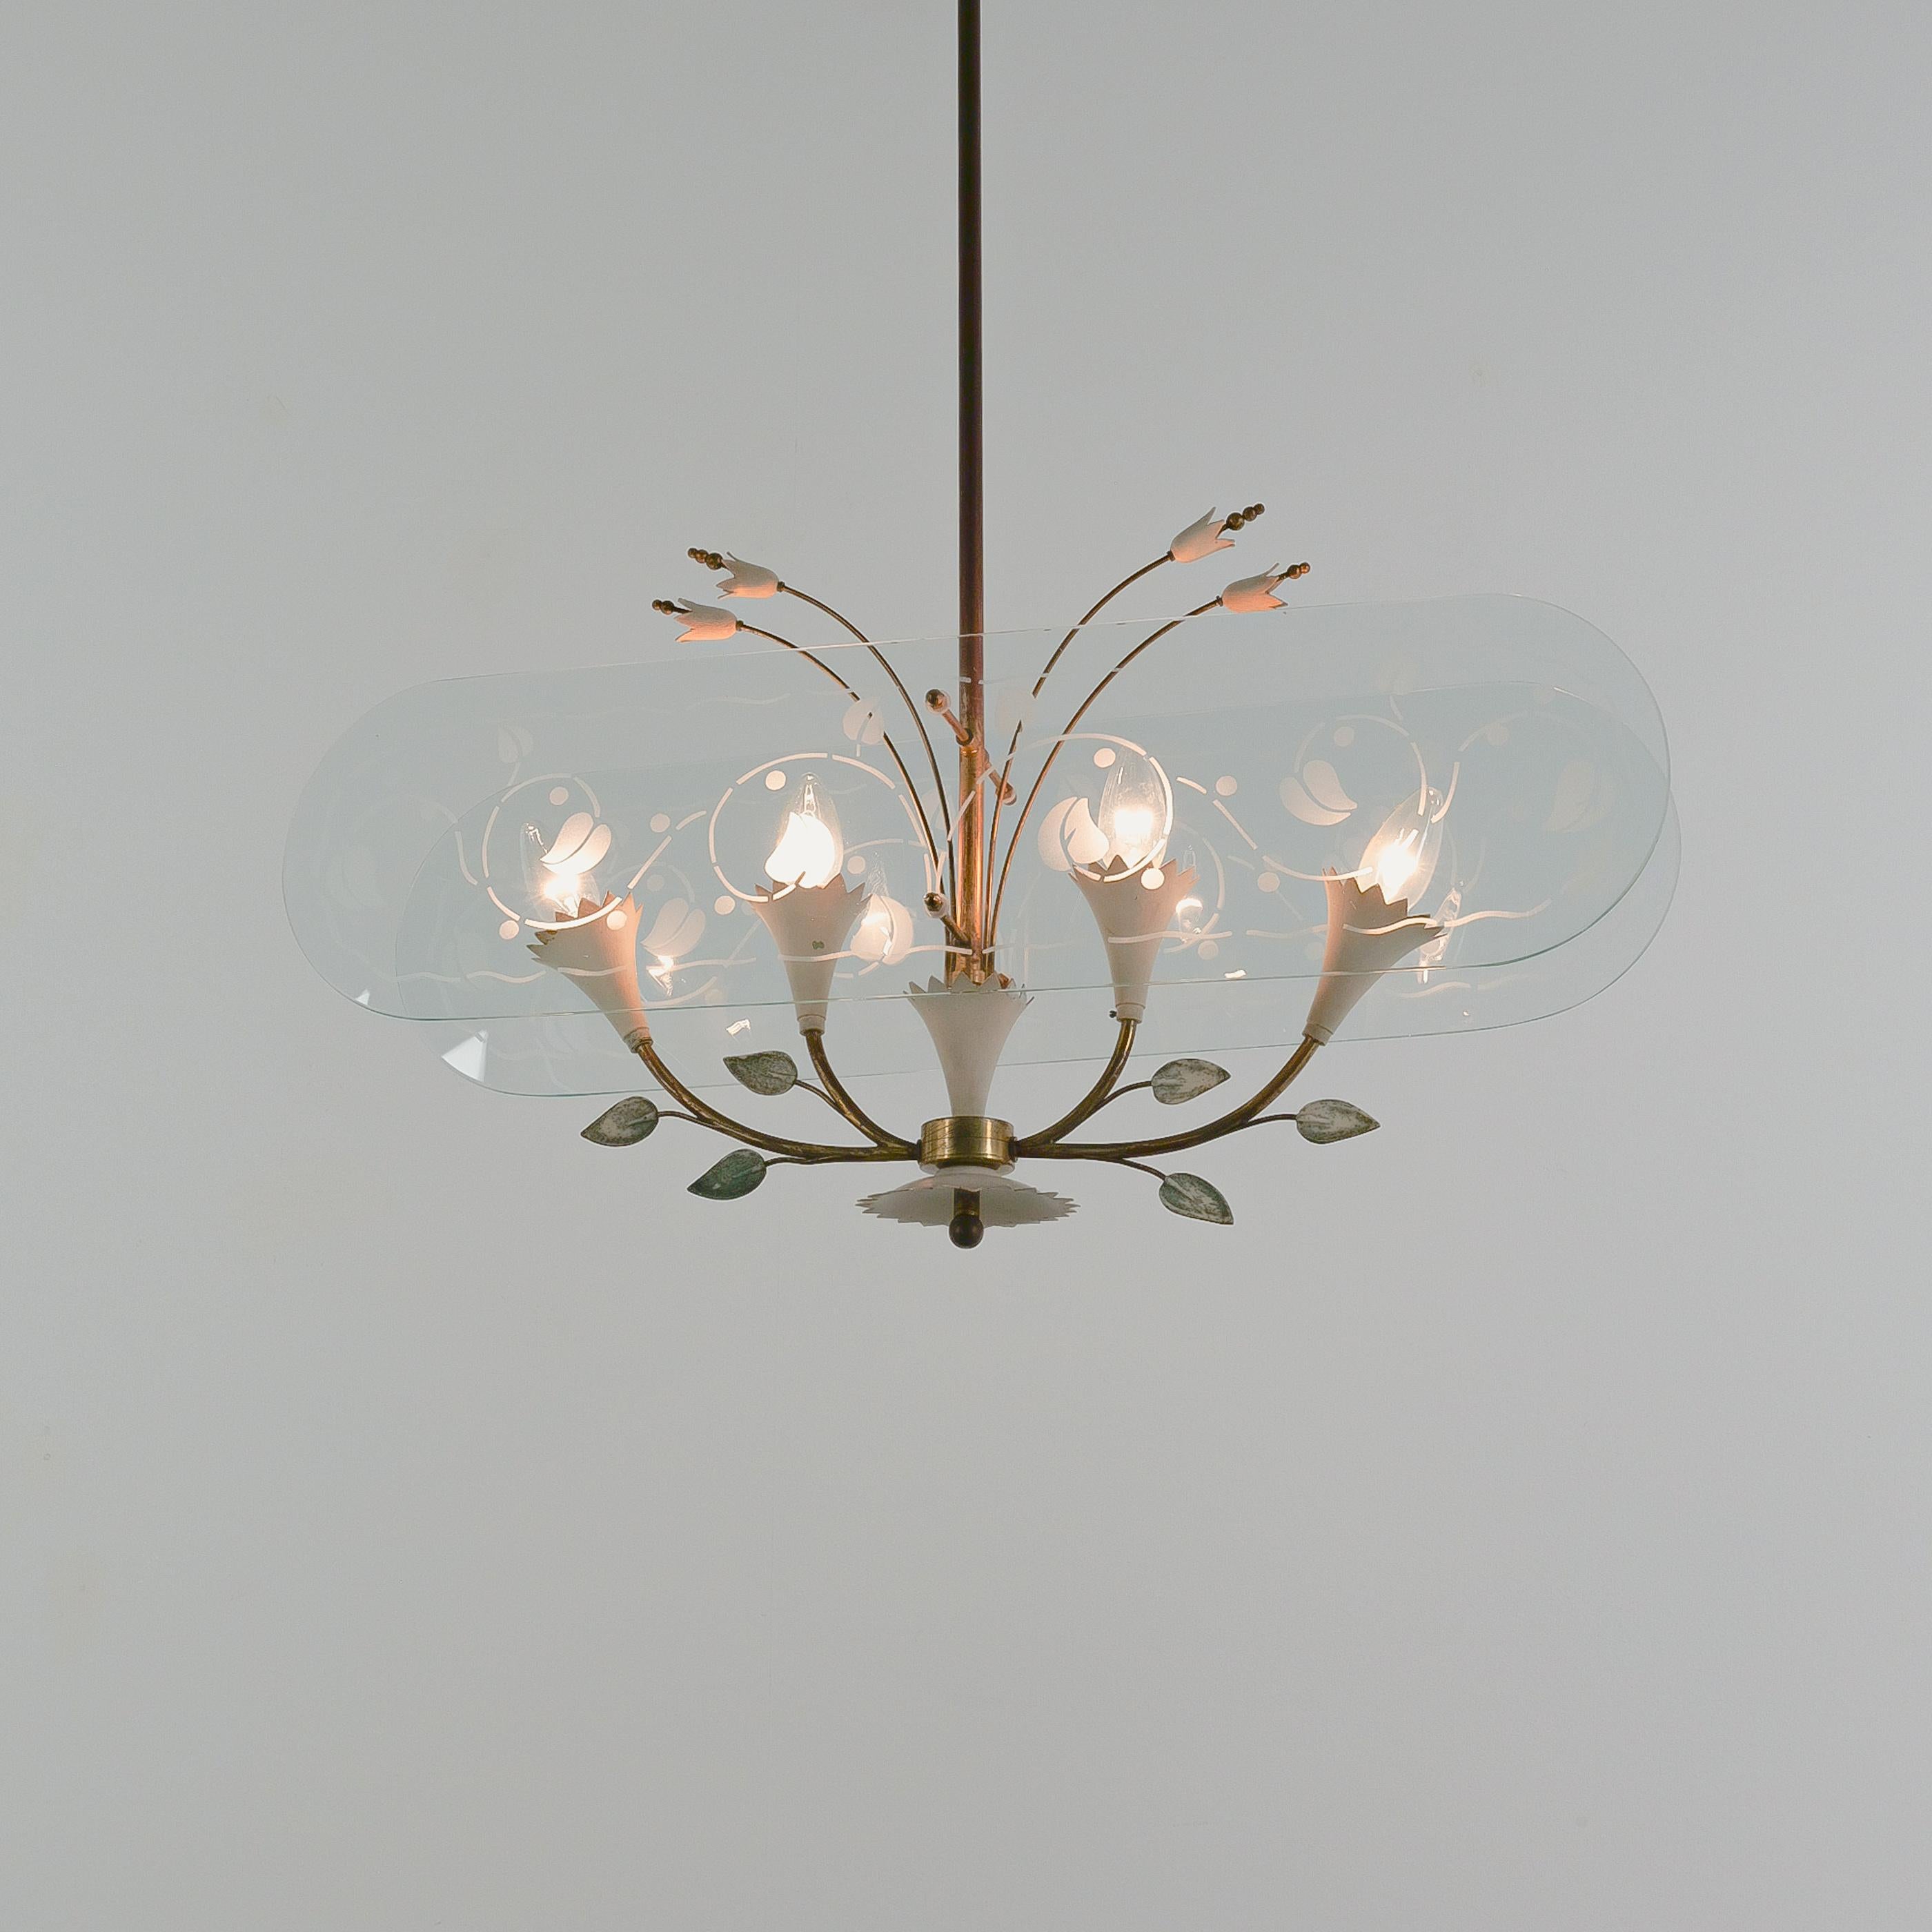 Pietro Chiesa Chandelier Floral Glass with Etched Details Italy, 1950 For Sale 7